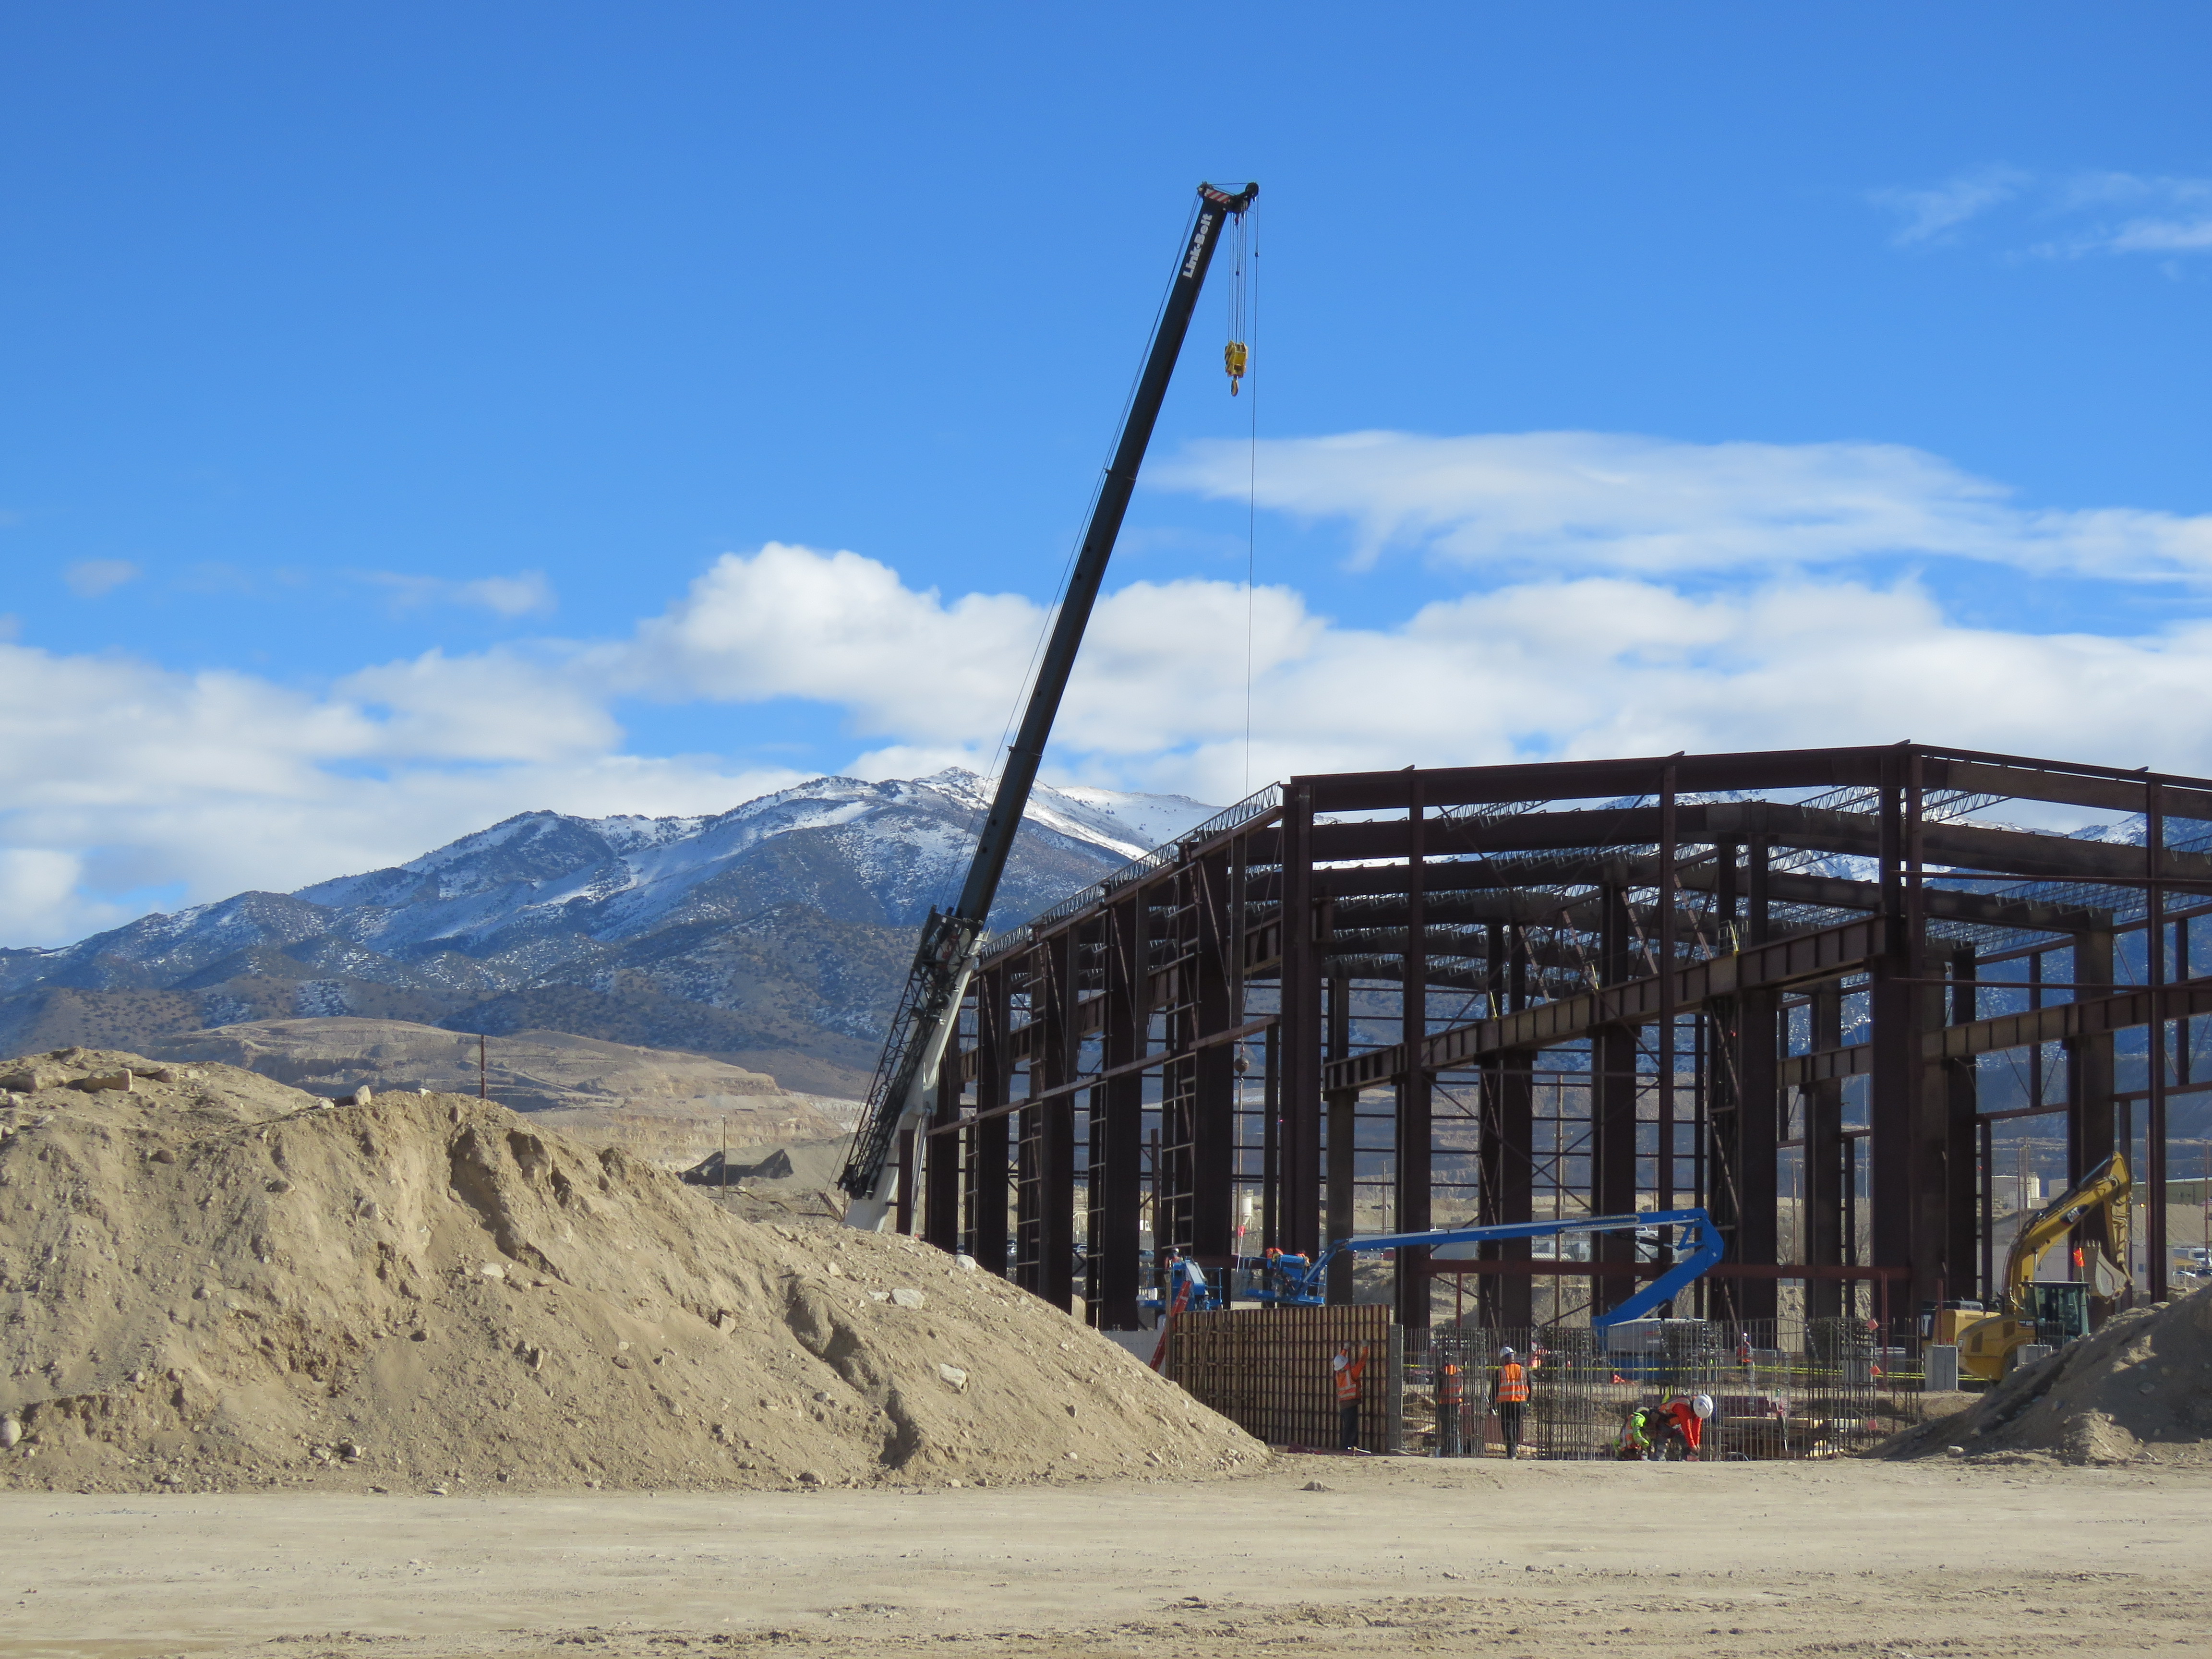 Sundt is self-performing the majority of work on the PEMBs (pre-engineered metal buildings), which will serve as new processing facilities for the gold mine. 